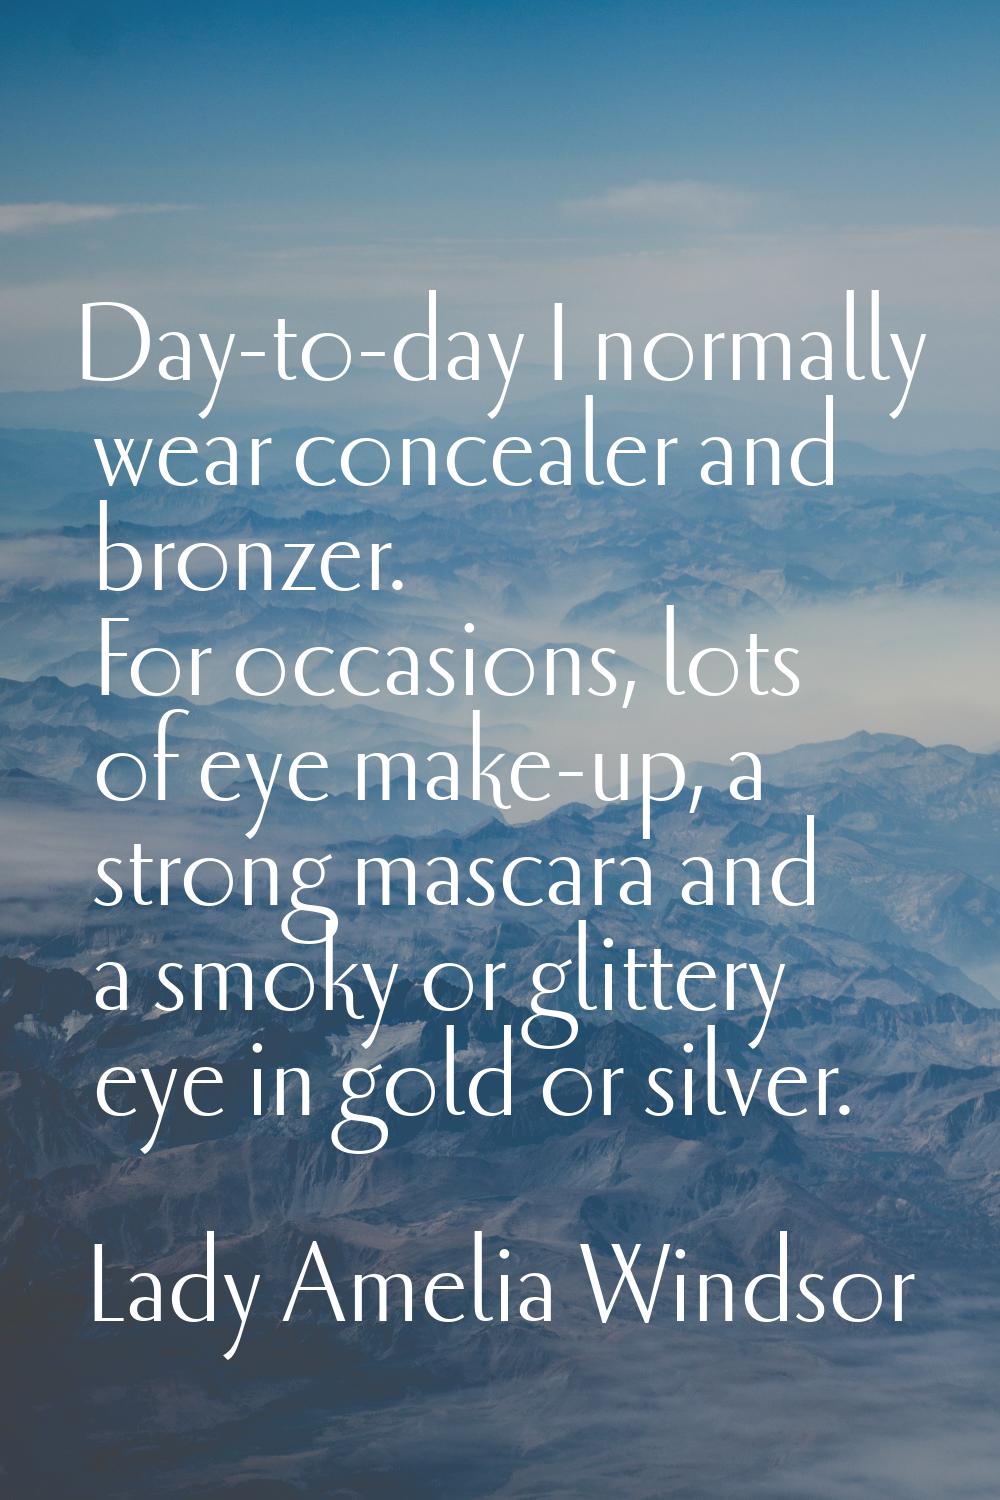 Day-to-day I normally wear concealer and bronzer. For occasions, lots of eye make-up, a strong masc